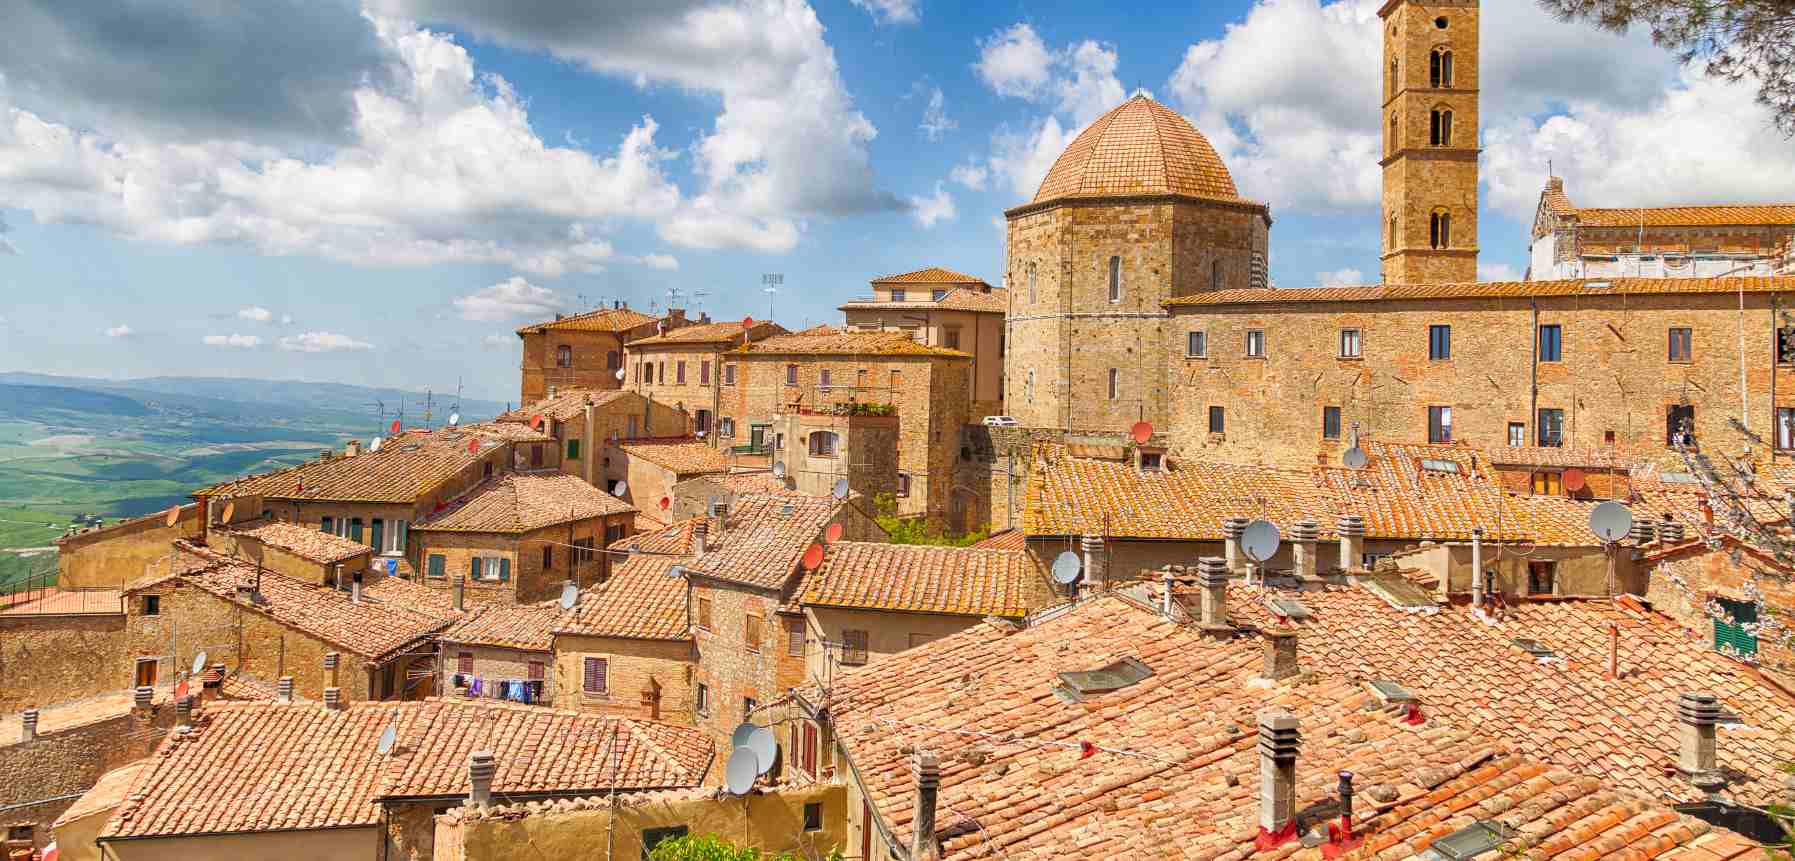 Tour to Volterra for Classical Italy